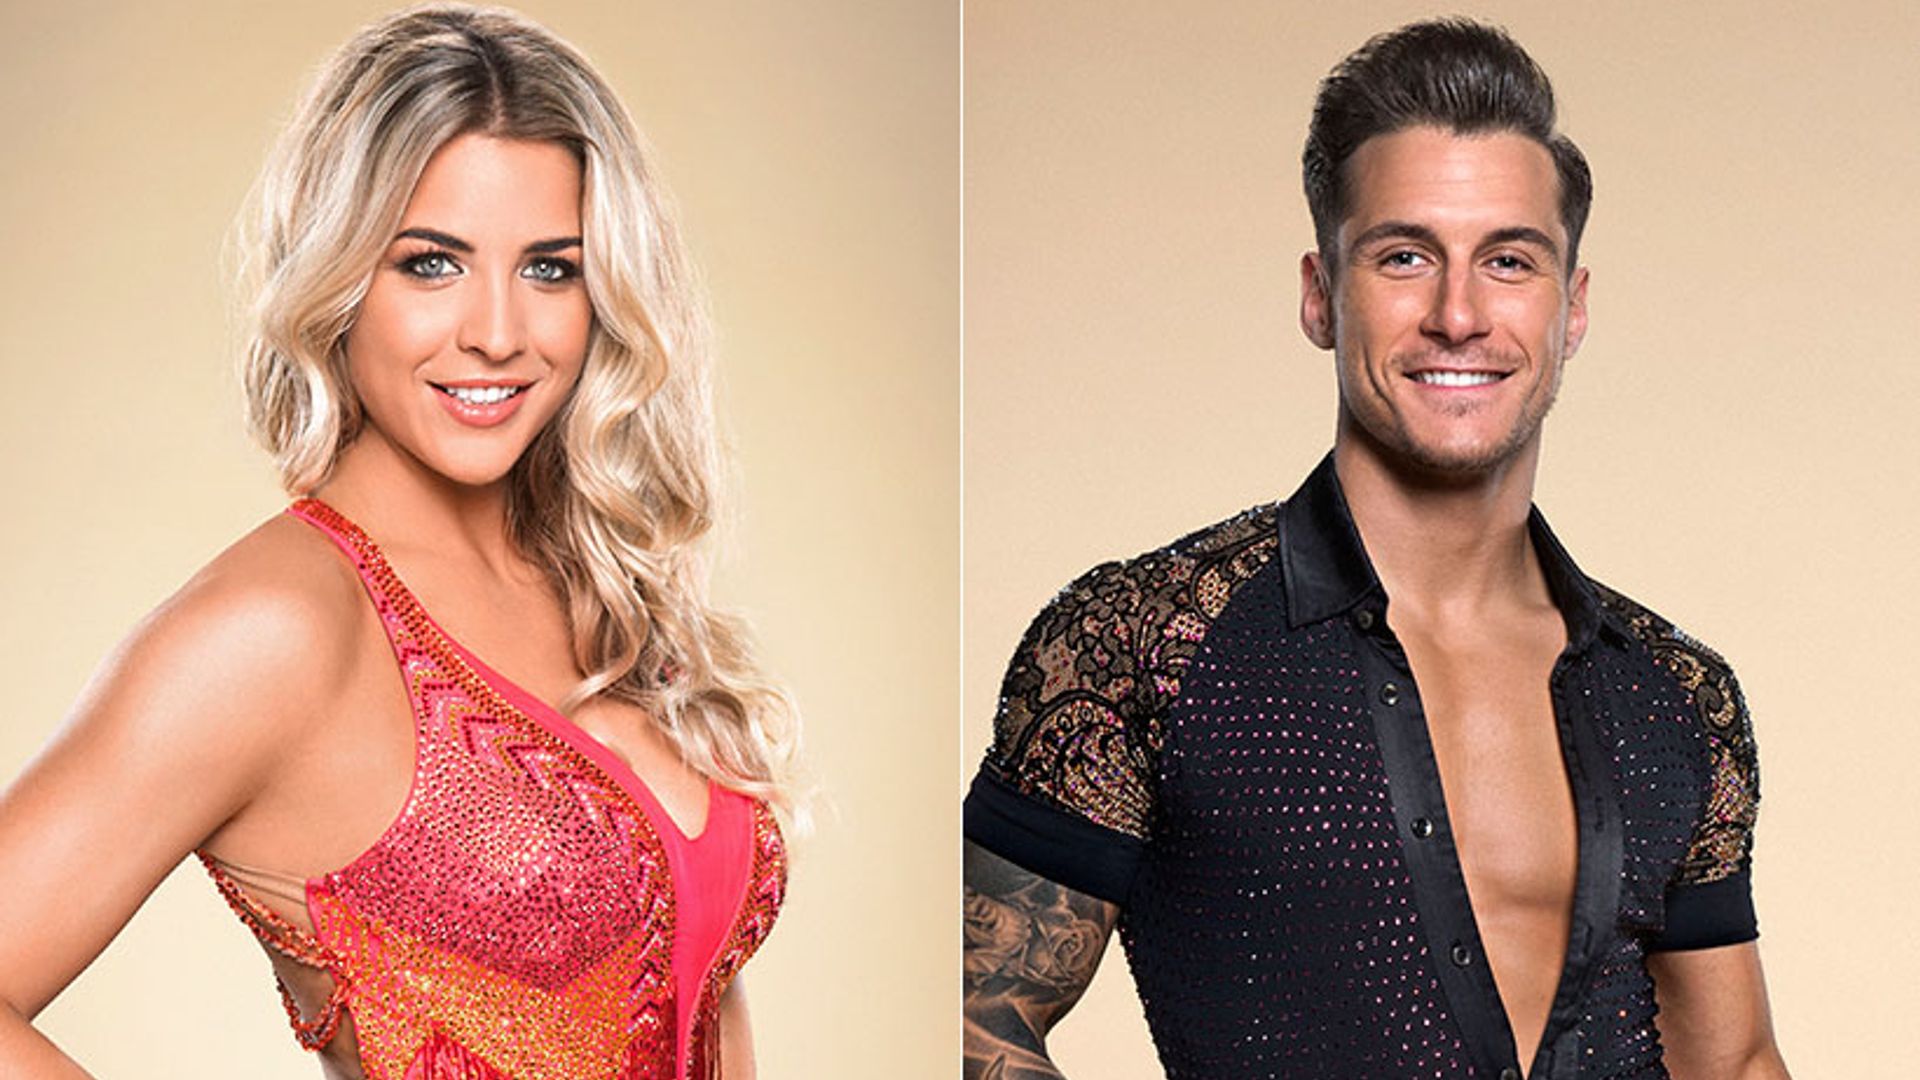 Gemma Atkinson shares hilarious video of 'date night' with Gorka Marquez